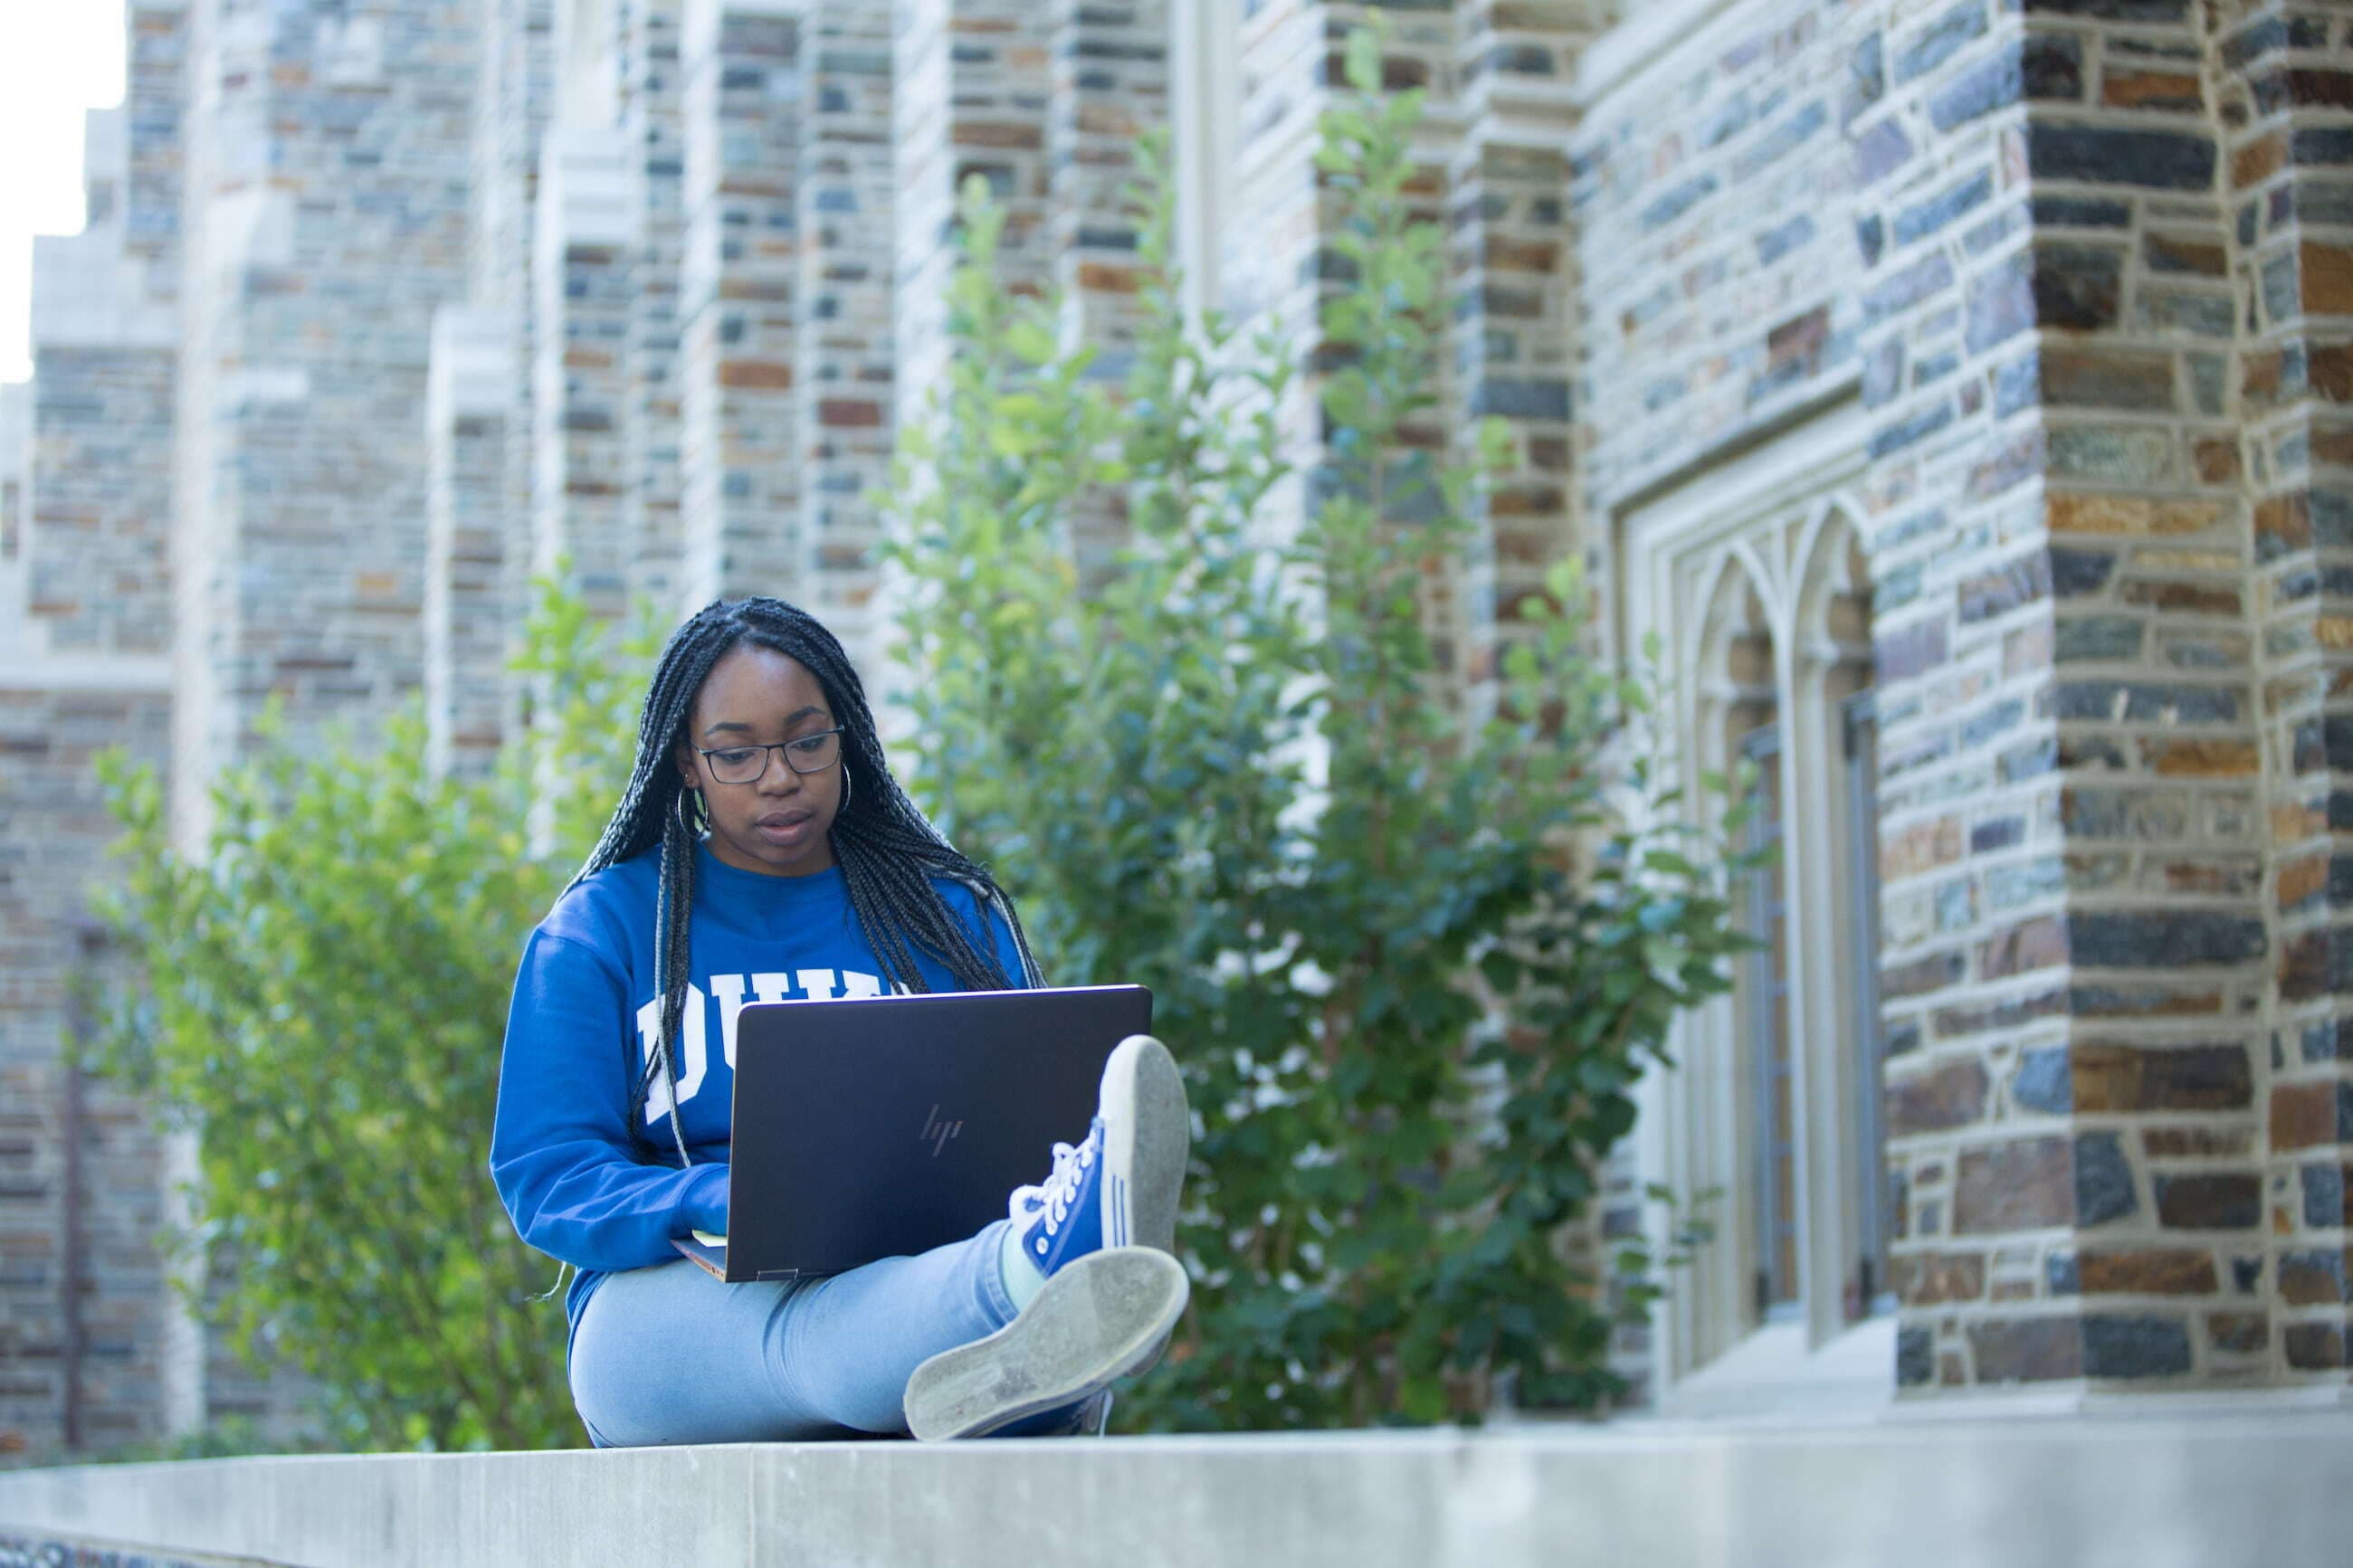 Michelle Katmauswa, a student at Duke University and CollegePoint initiative participant, studies on campus.